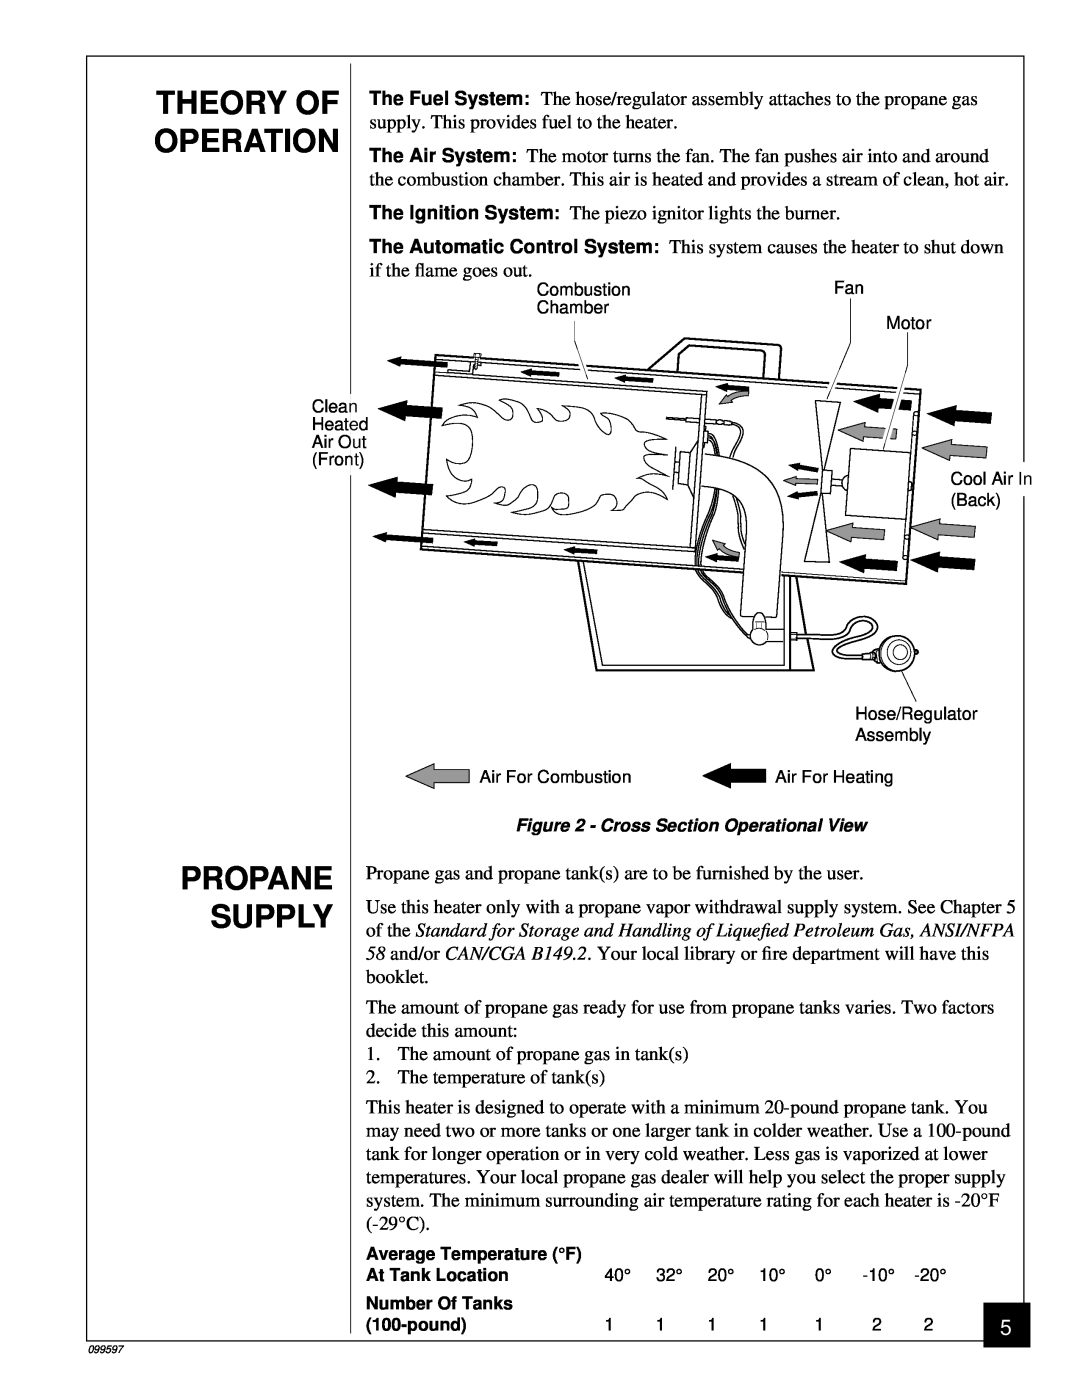 Homelite HP35 owner manual Theory Of, Operation, Supply, Propane 